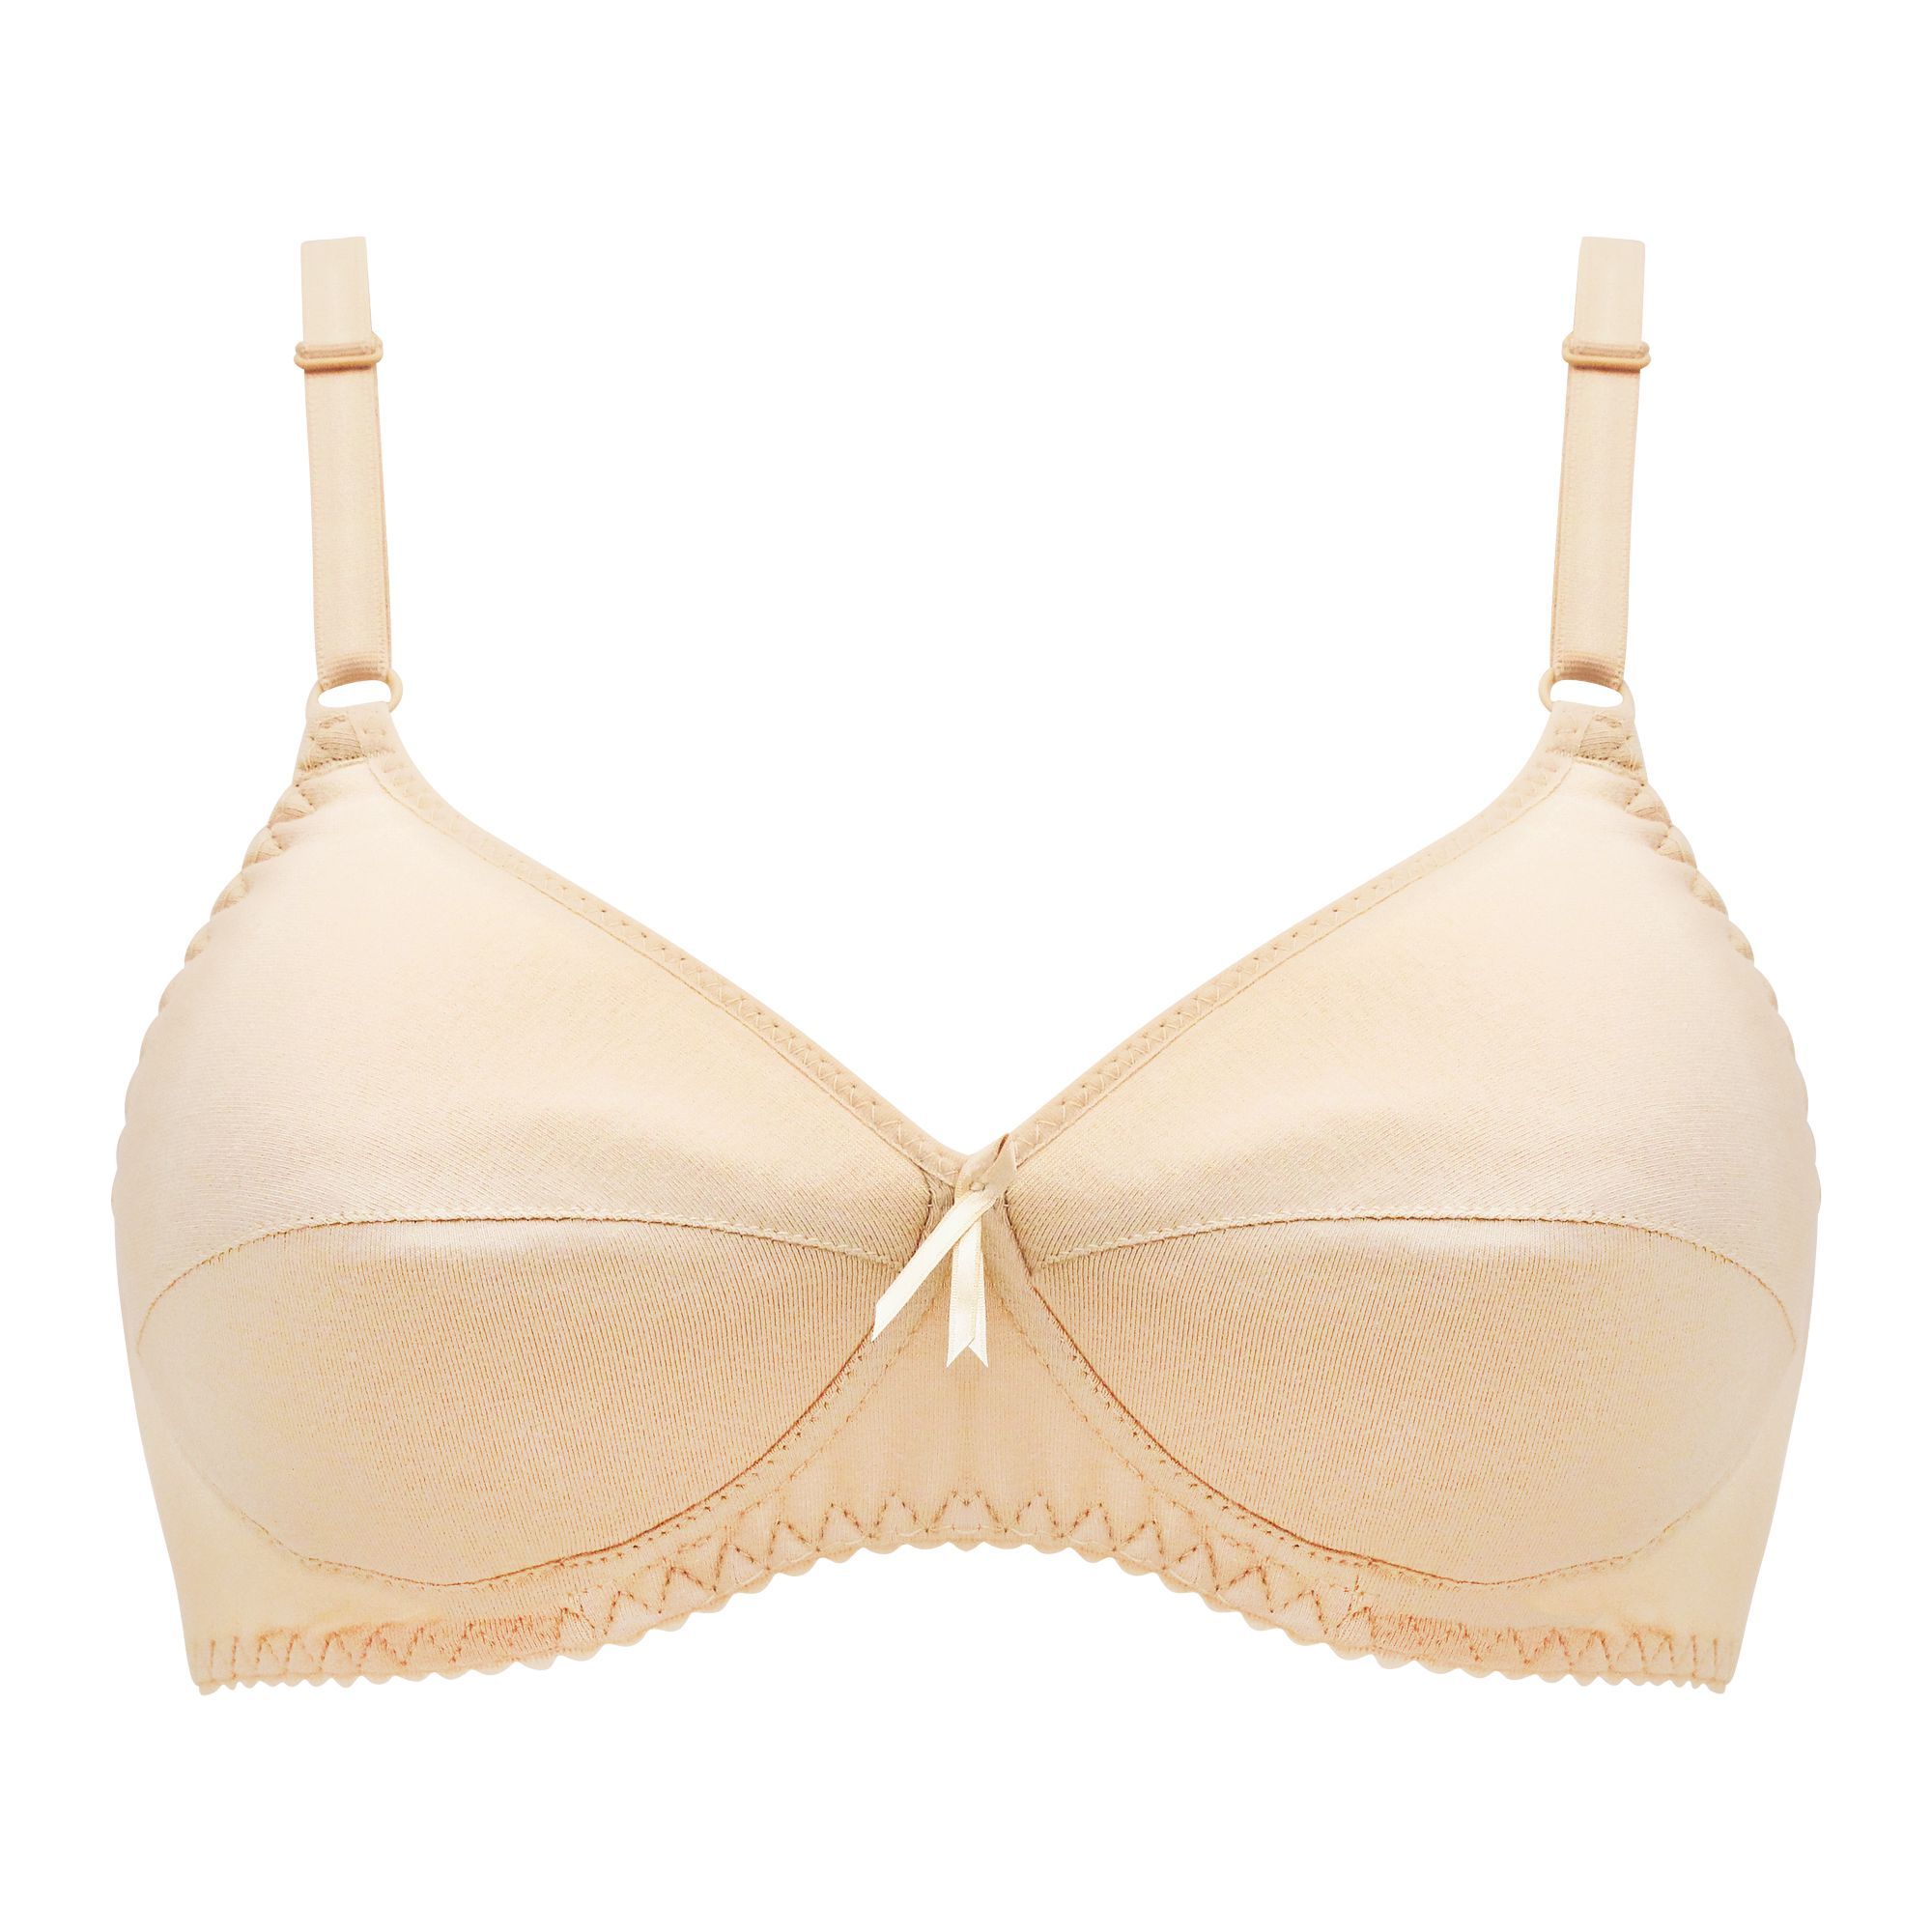 Order BeBelle Softouch-P Cotton Spandex Fabric Bra, Skin Online at